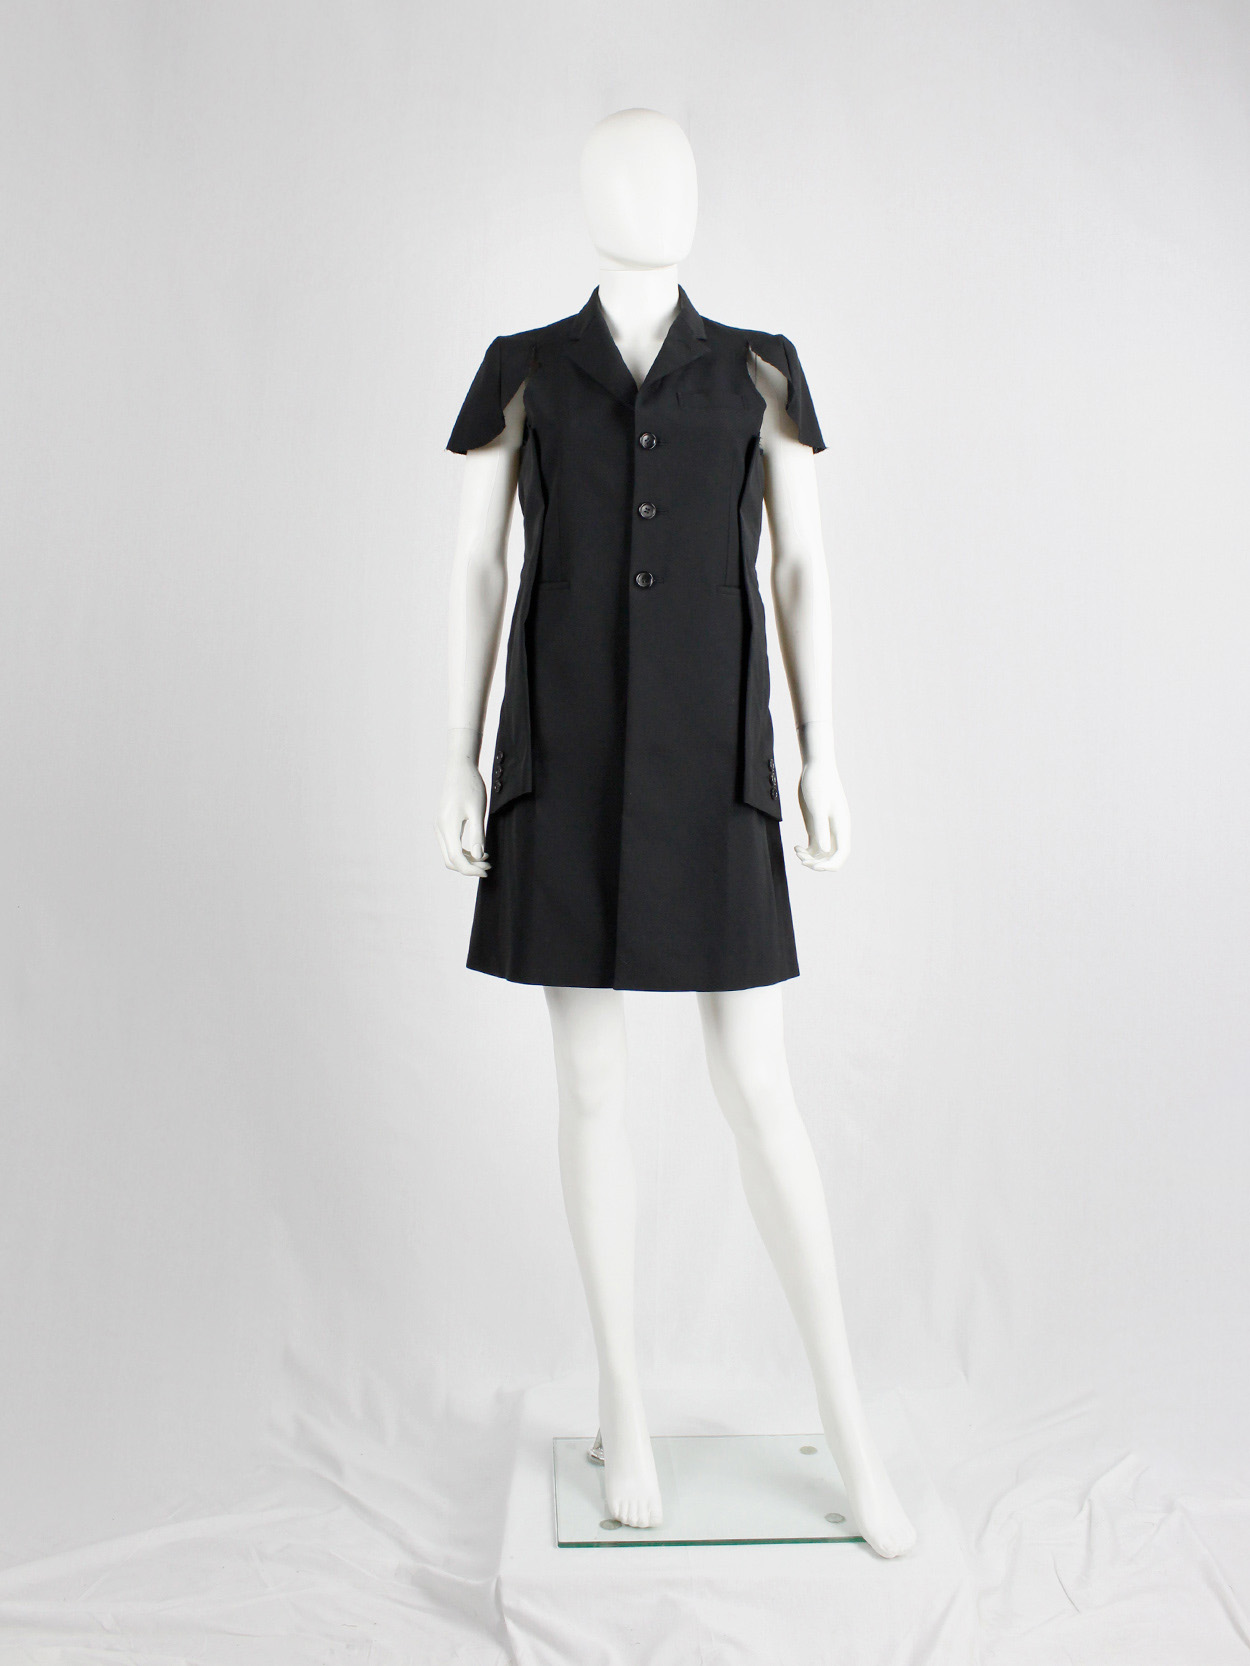 Comme des Garcons black deconstructed jacket with cut off sleeves sewn on the sides spring 2012 (14)